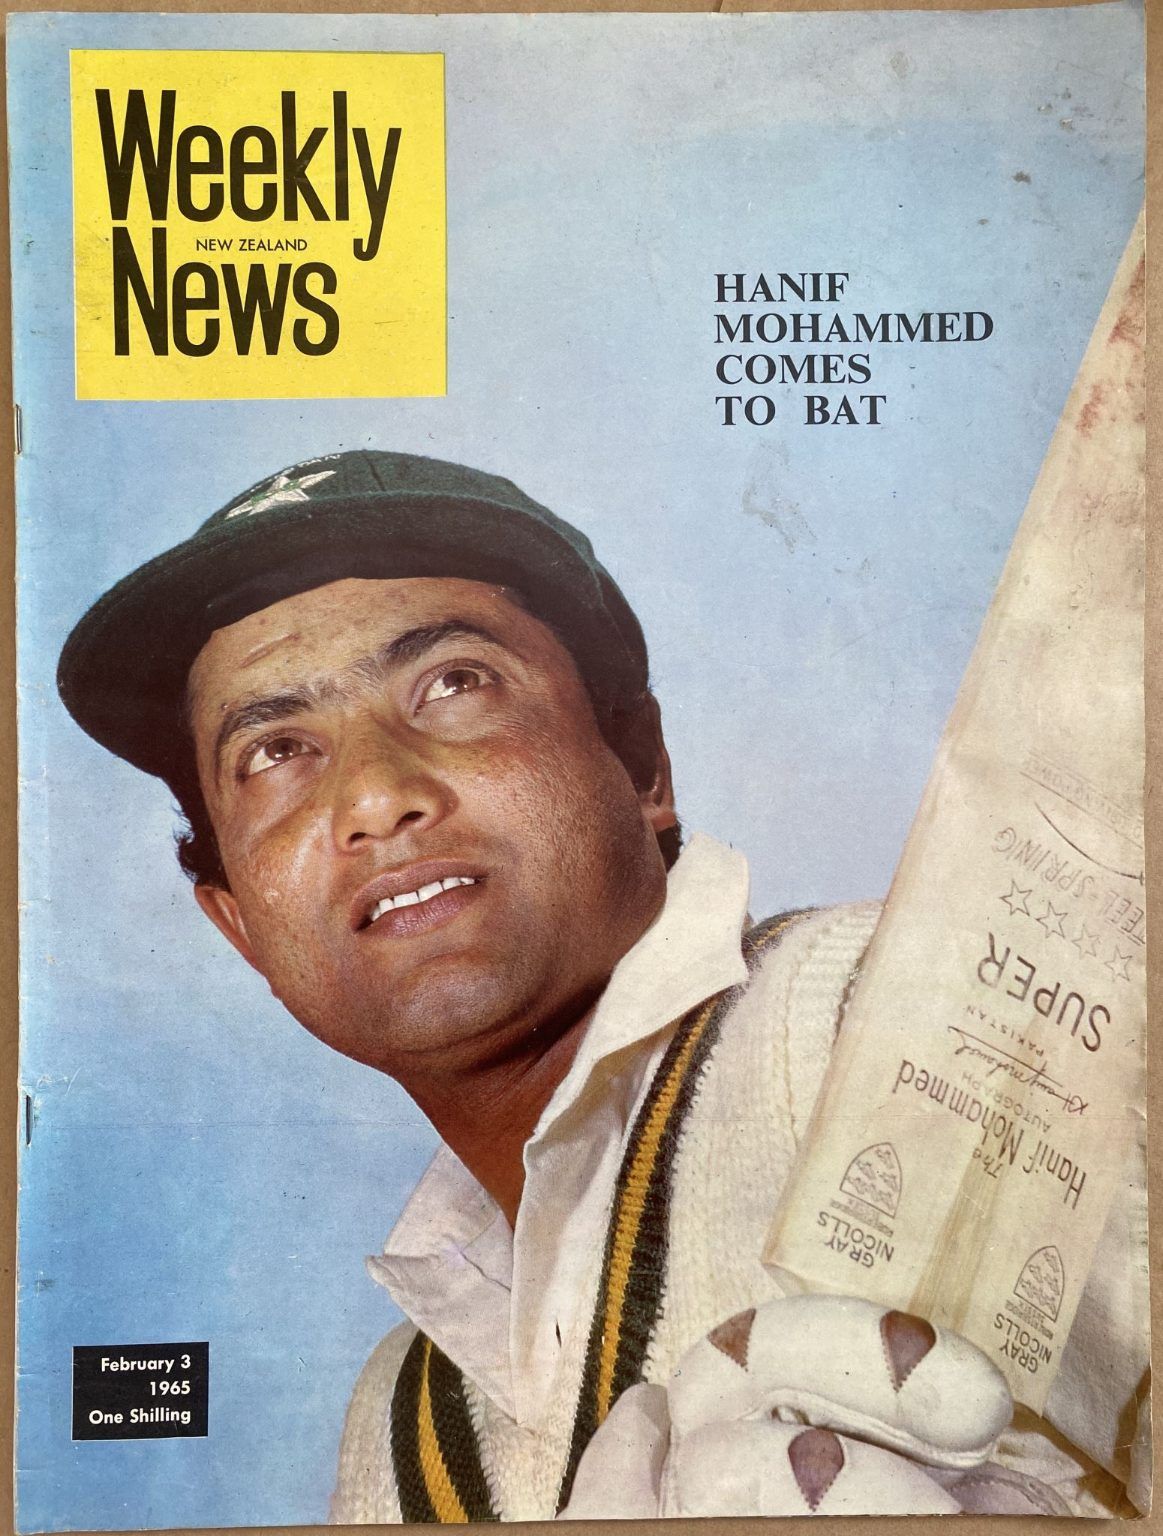 OLD NEWSPAPER: New Zealand Weekly News, No. 5280, 3 February 1965